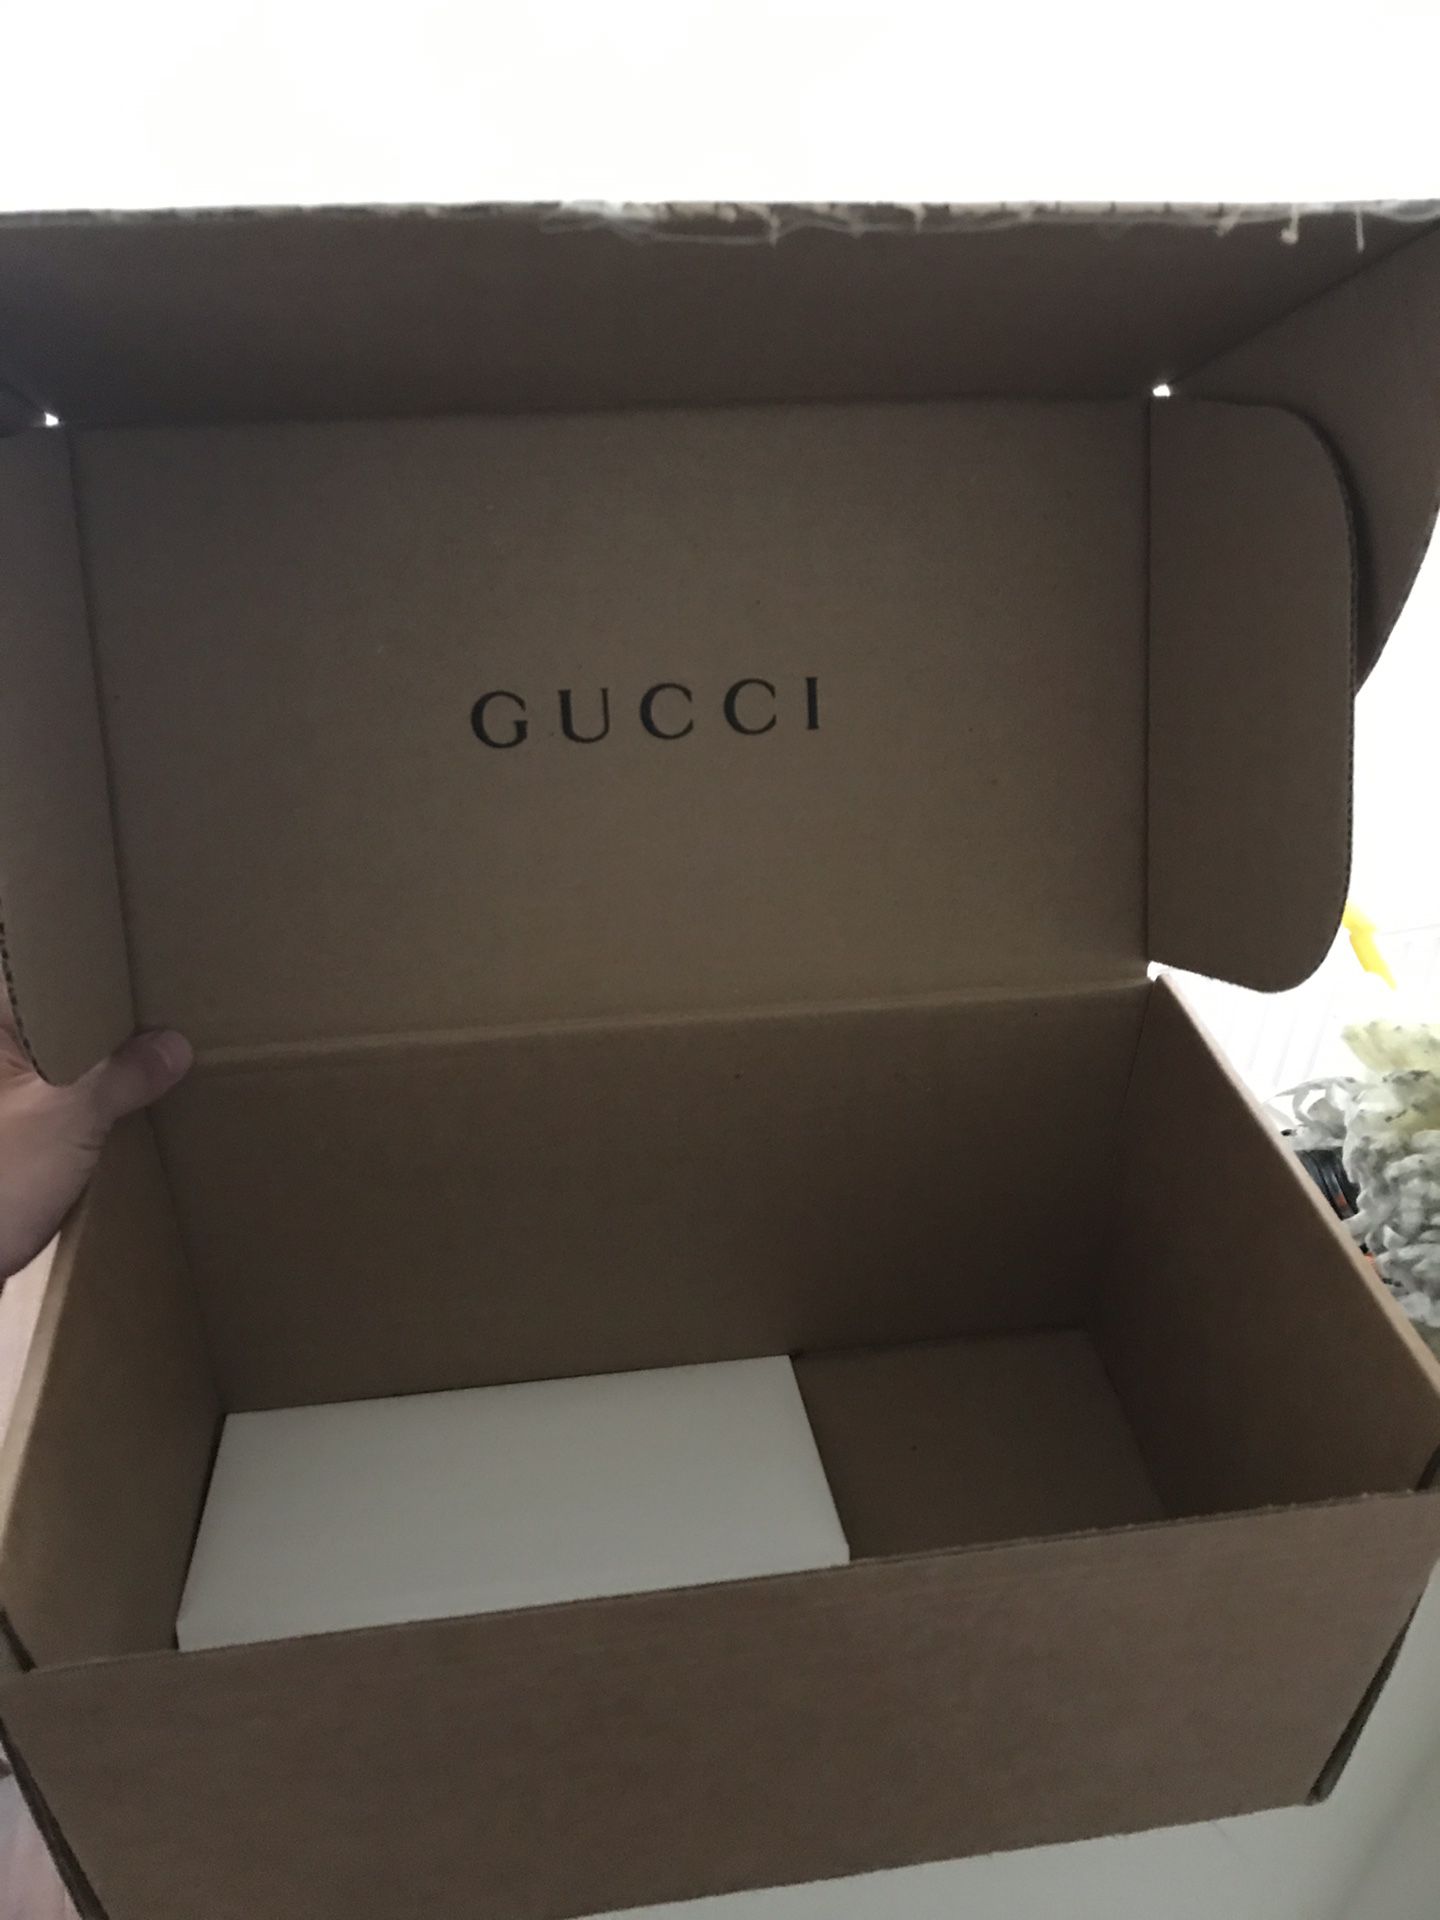 Gucci shipping box for Sale in Irvine, CA - OfferUp